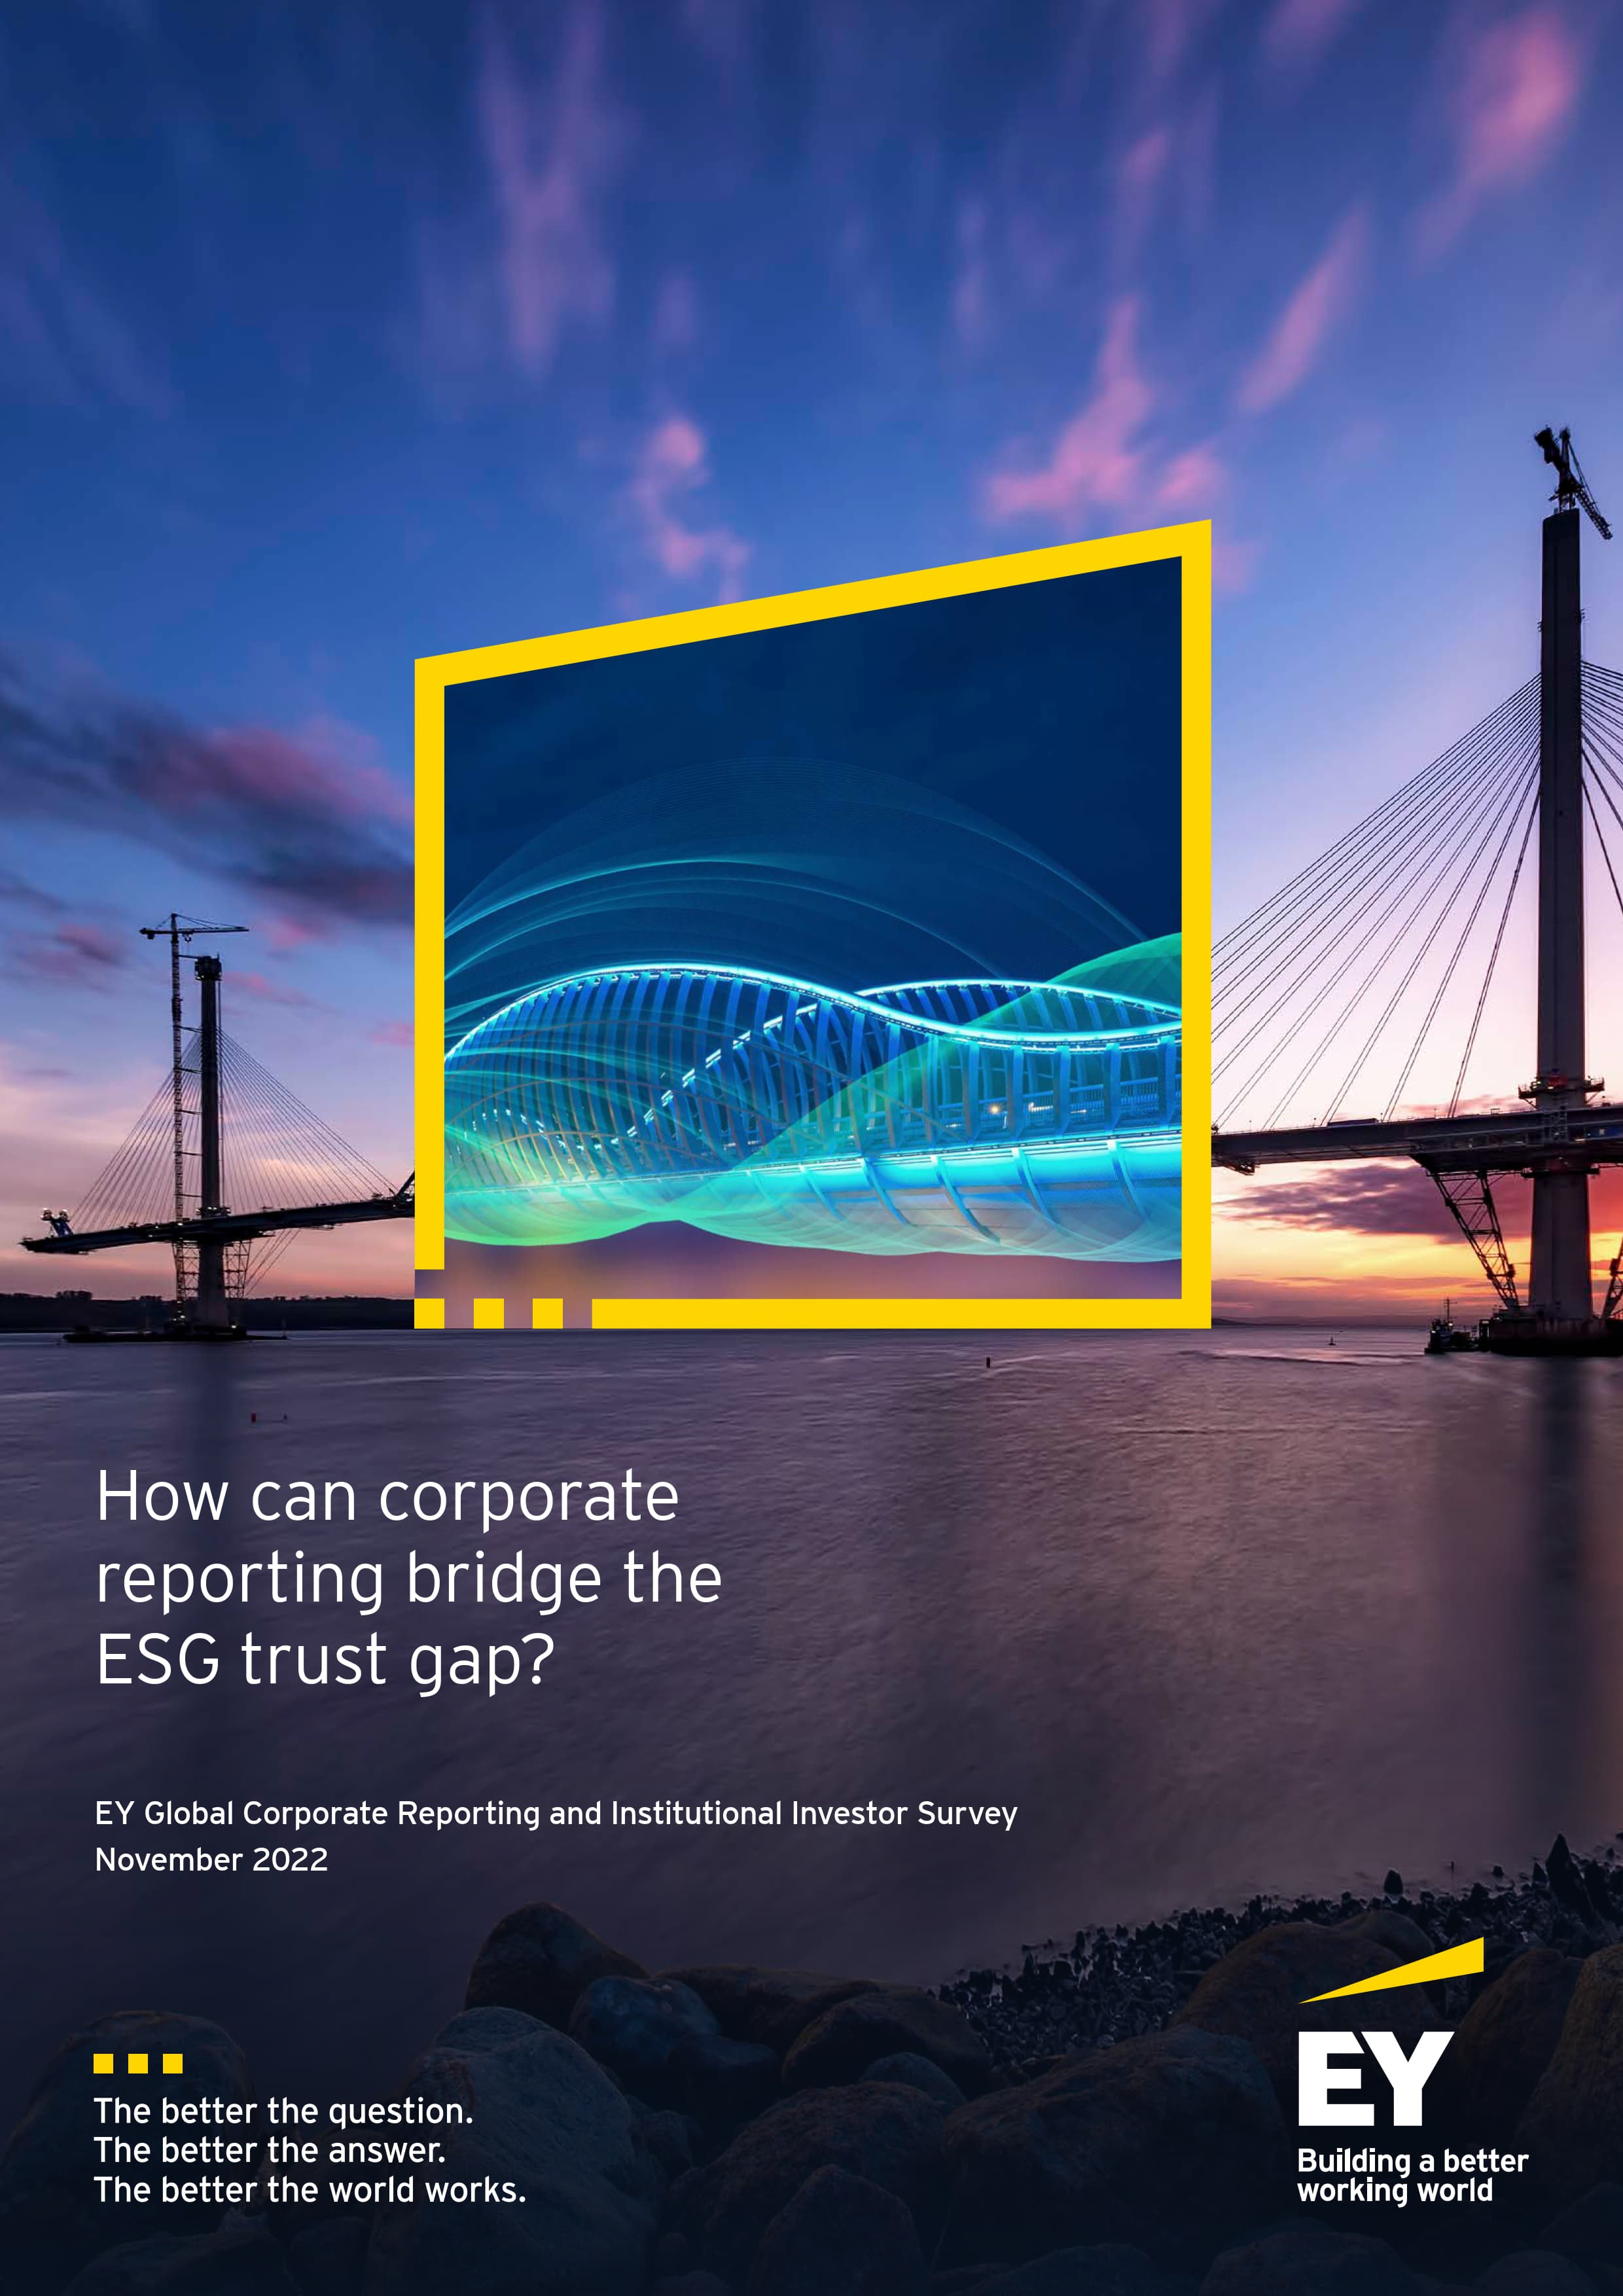 EY Global Corporate Reporting and Institutional Investor Survey, 2022